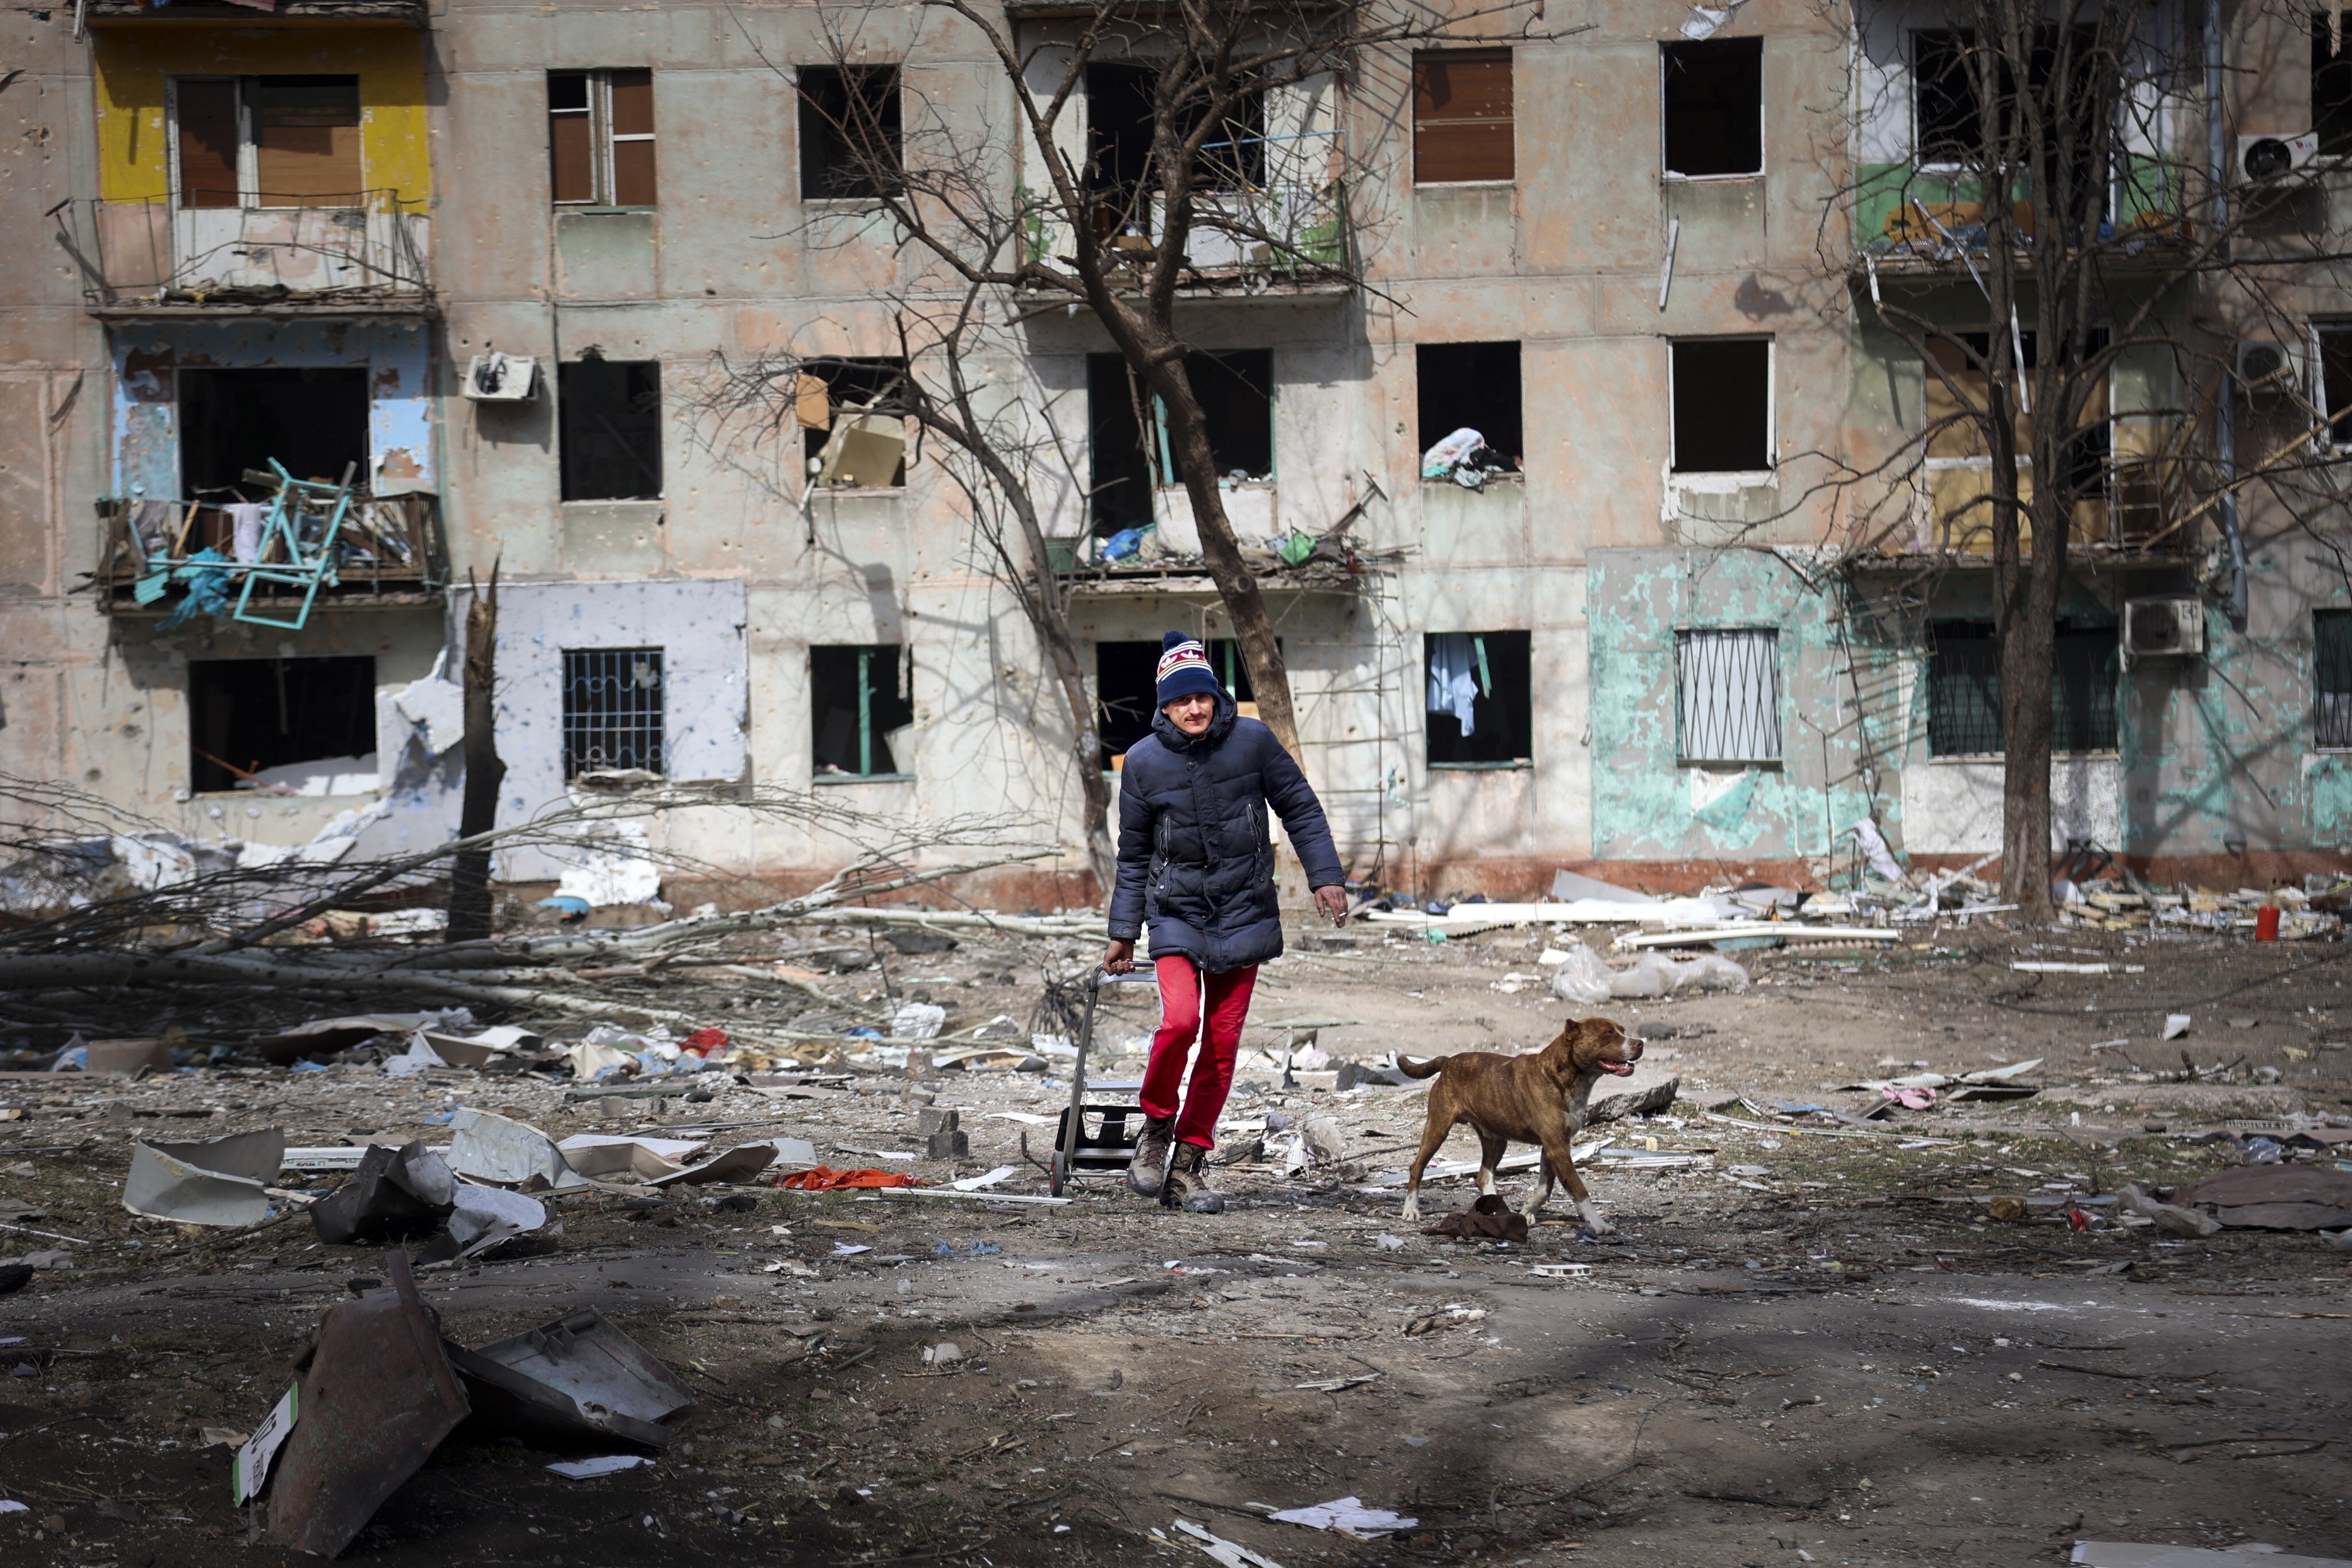 A man walks with his dog near a block of flats damaged by shelling from fighting on the outskirts of Mariupol, Ukraine, on March 29. Russia’s invasion of Ukraine has pushed Covid-19 out of the spotlight in many parts of the world, but the pandemic and government responses to it still have a large role to play in the global economy. Photo: AP